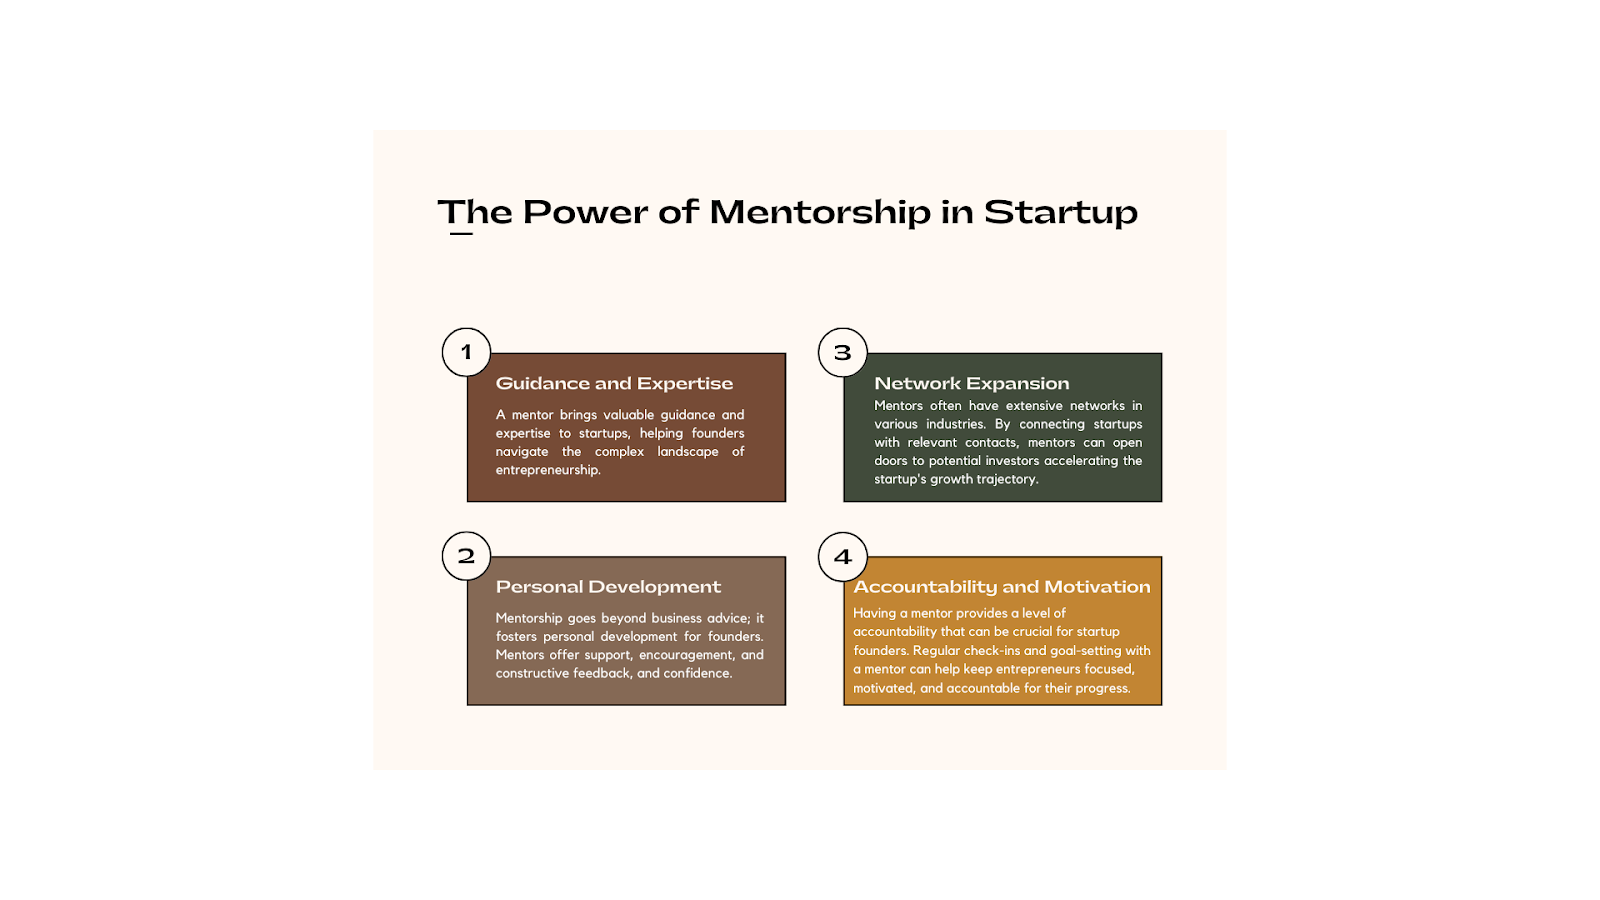 The Power of Mentorship in Startup.